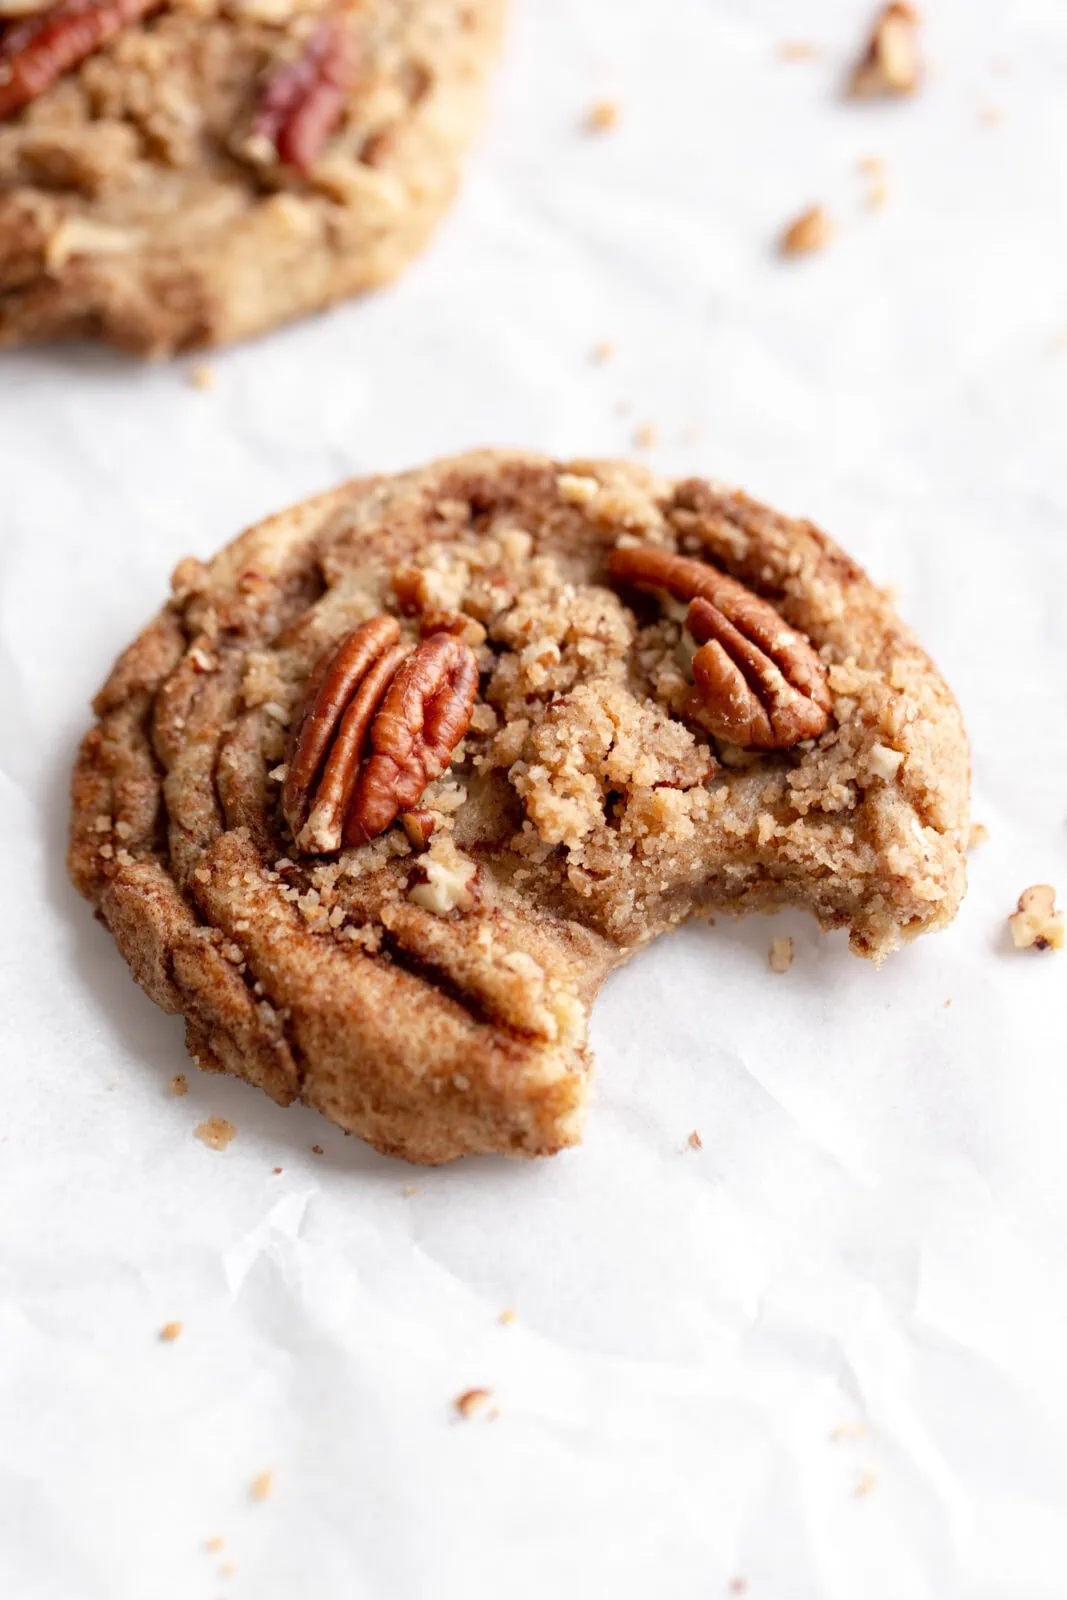 maple pecan crumble cookies with cinnamon streusel topping